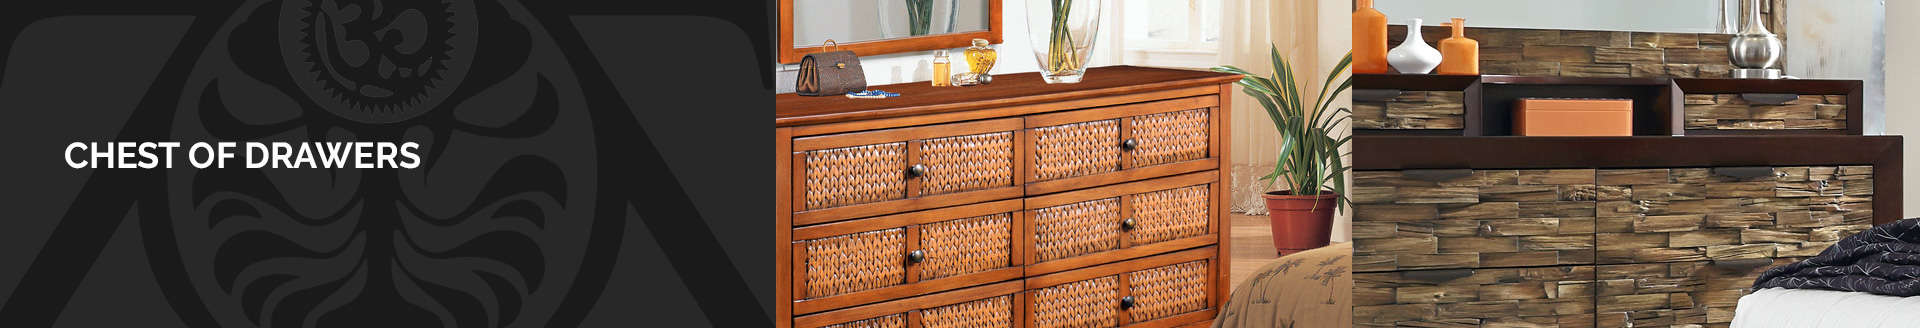 chest of drawers catalogue manufacturers indonesia exporters wholesalers suppliers bali java jepara zenddu